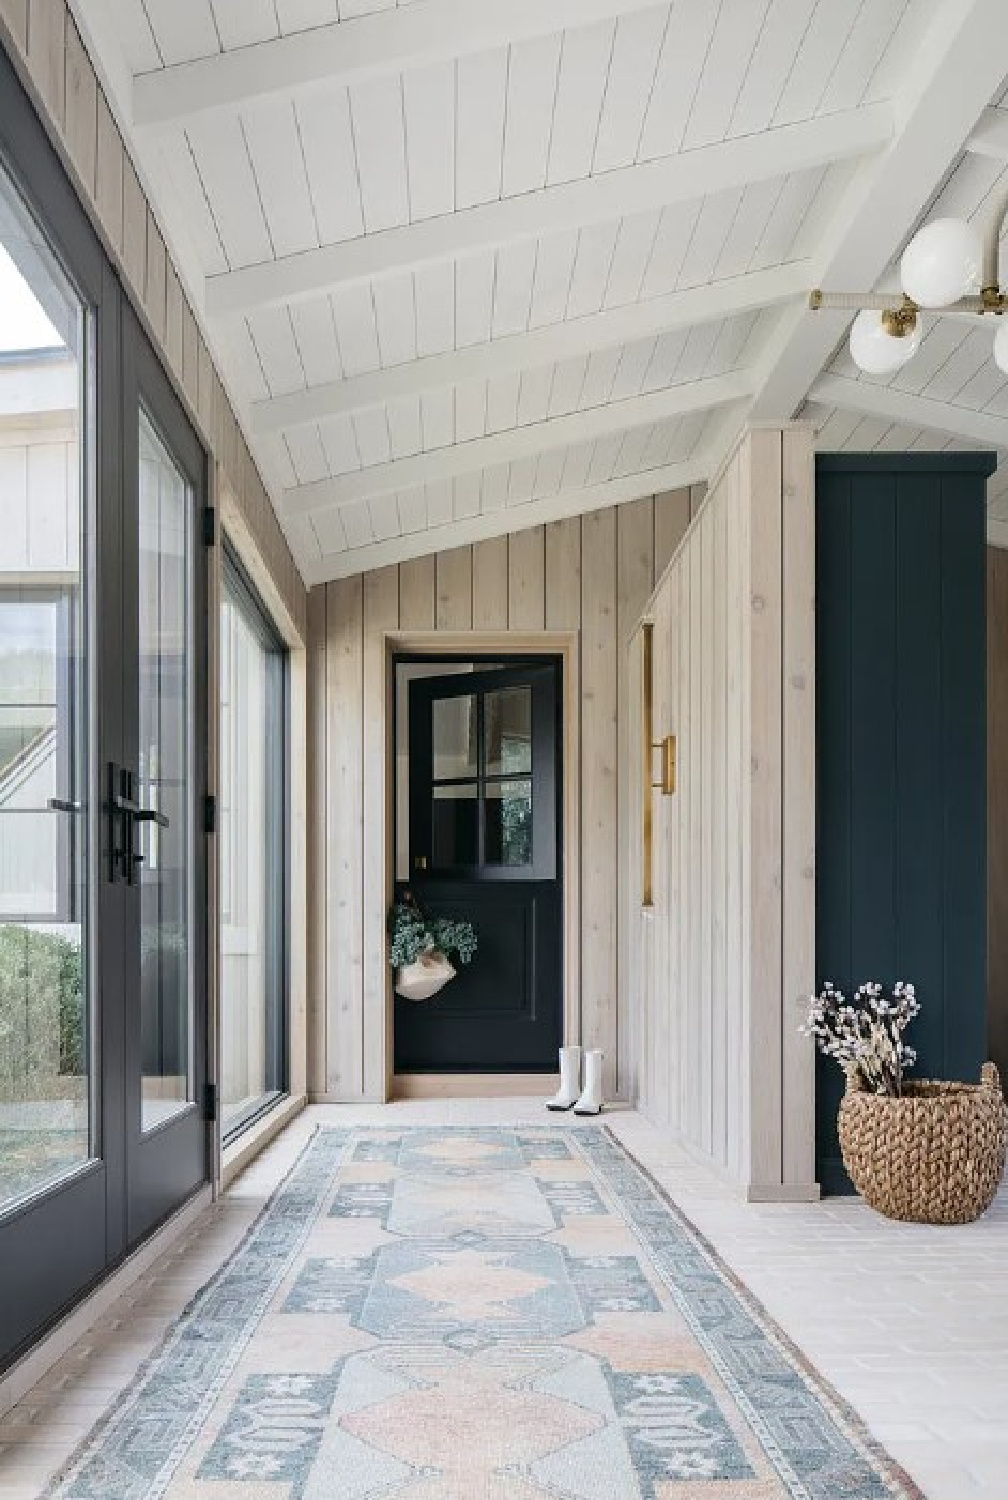 Breezeway and Dutch door in Kate Marker's 1920 white stucco Barrington Hills, IL Home (160 N. Buckley Rd) with modern, serene, unfussy, timeless interiors. #katemarkerinteriors @thedawnmckennagroup #katemarkerhome